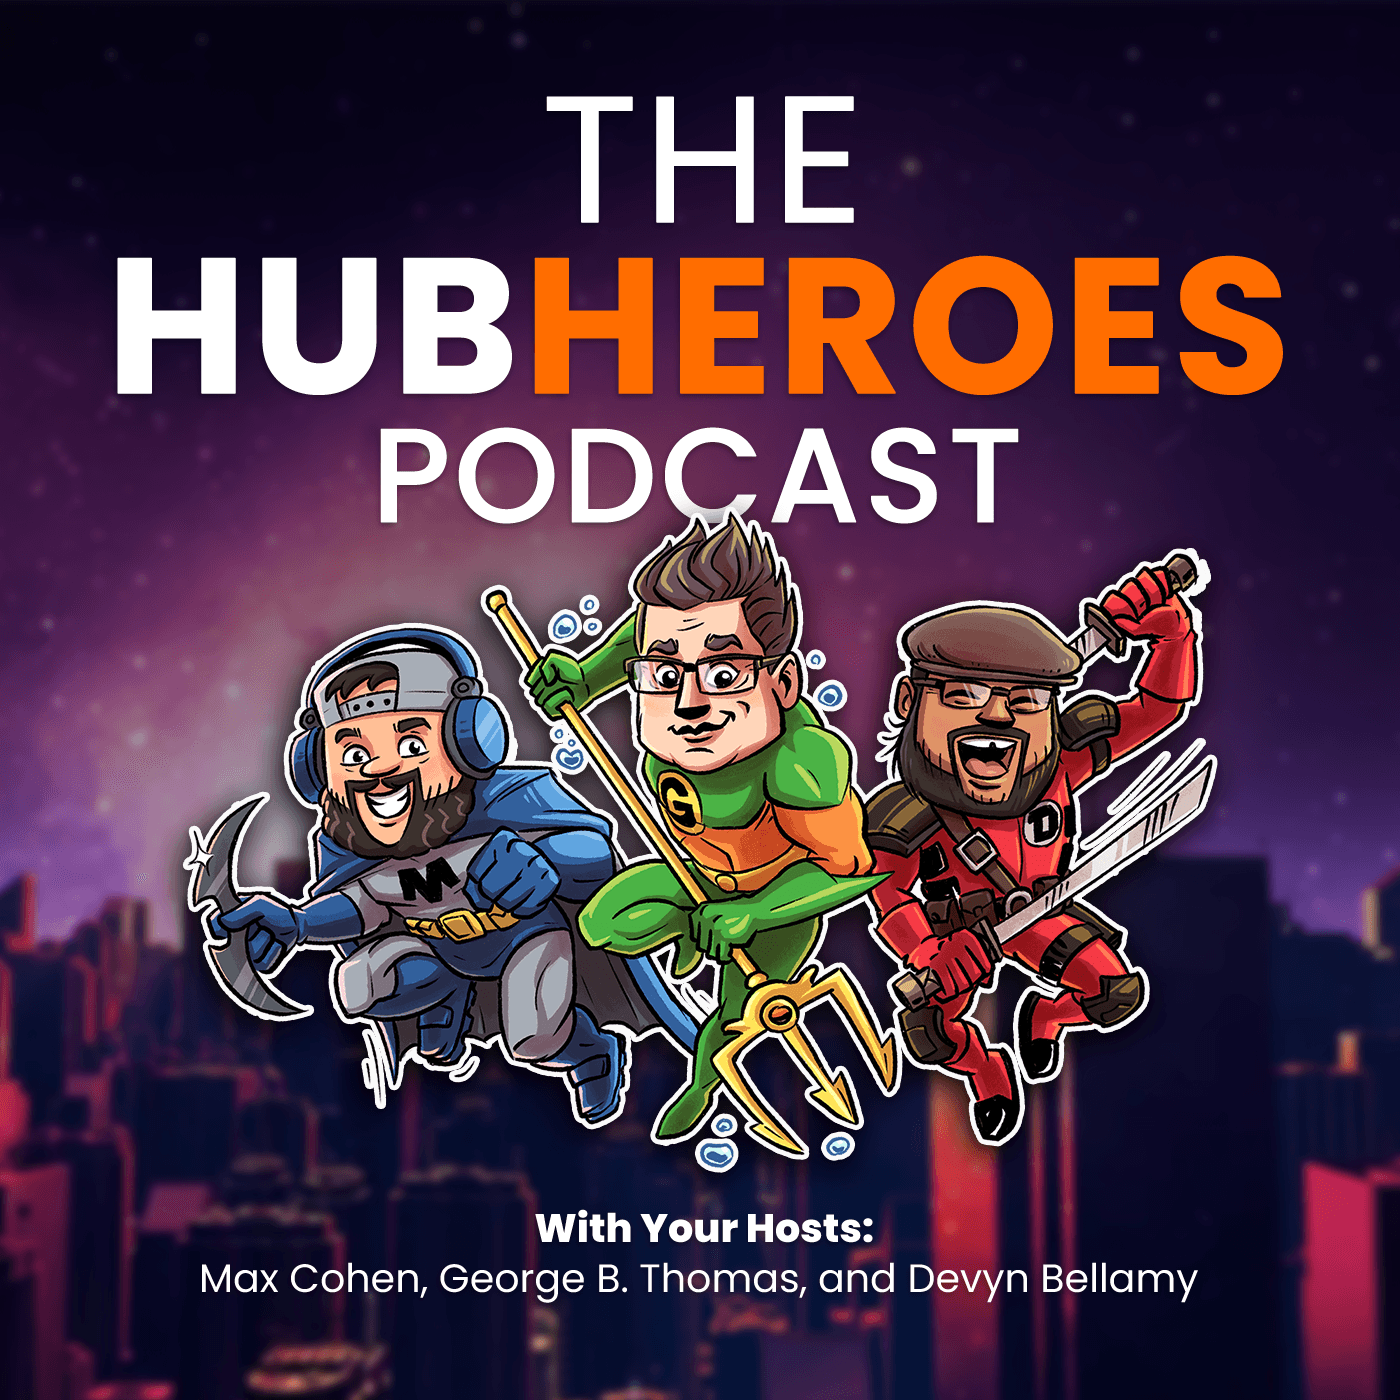 HubSpot custom properties, objects, and groups 101 + best practices (HubHeroes Podcast, Ep. 8)